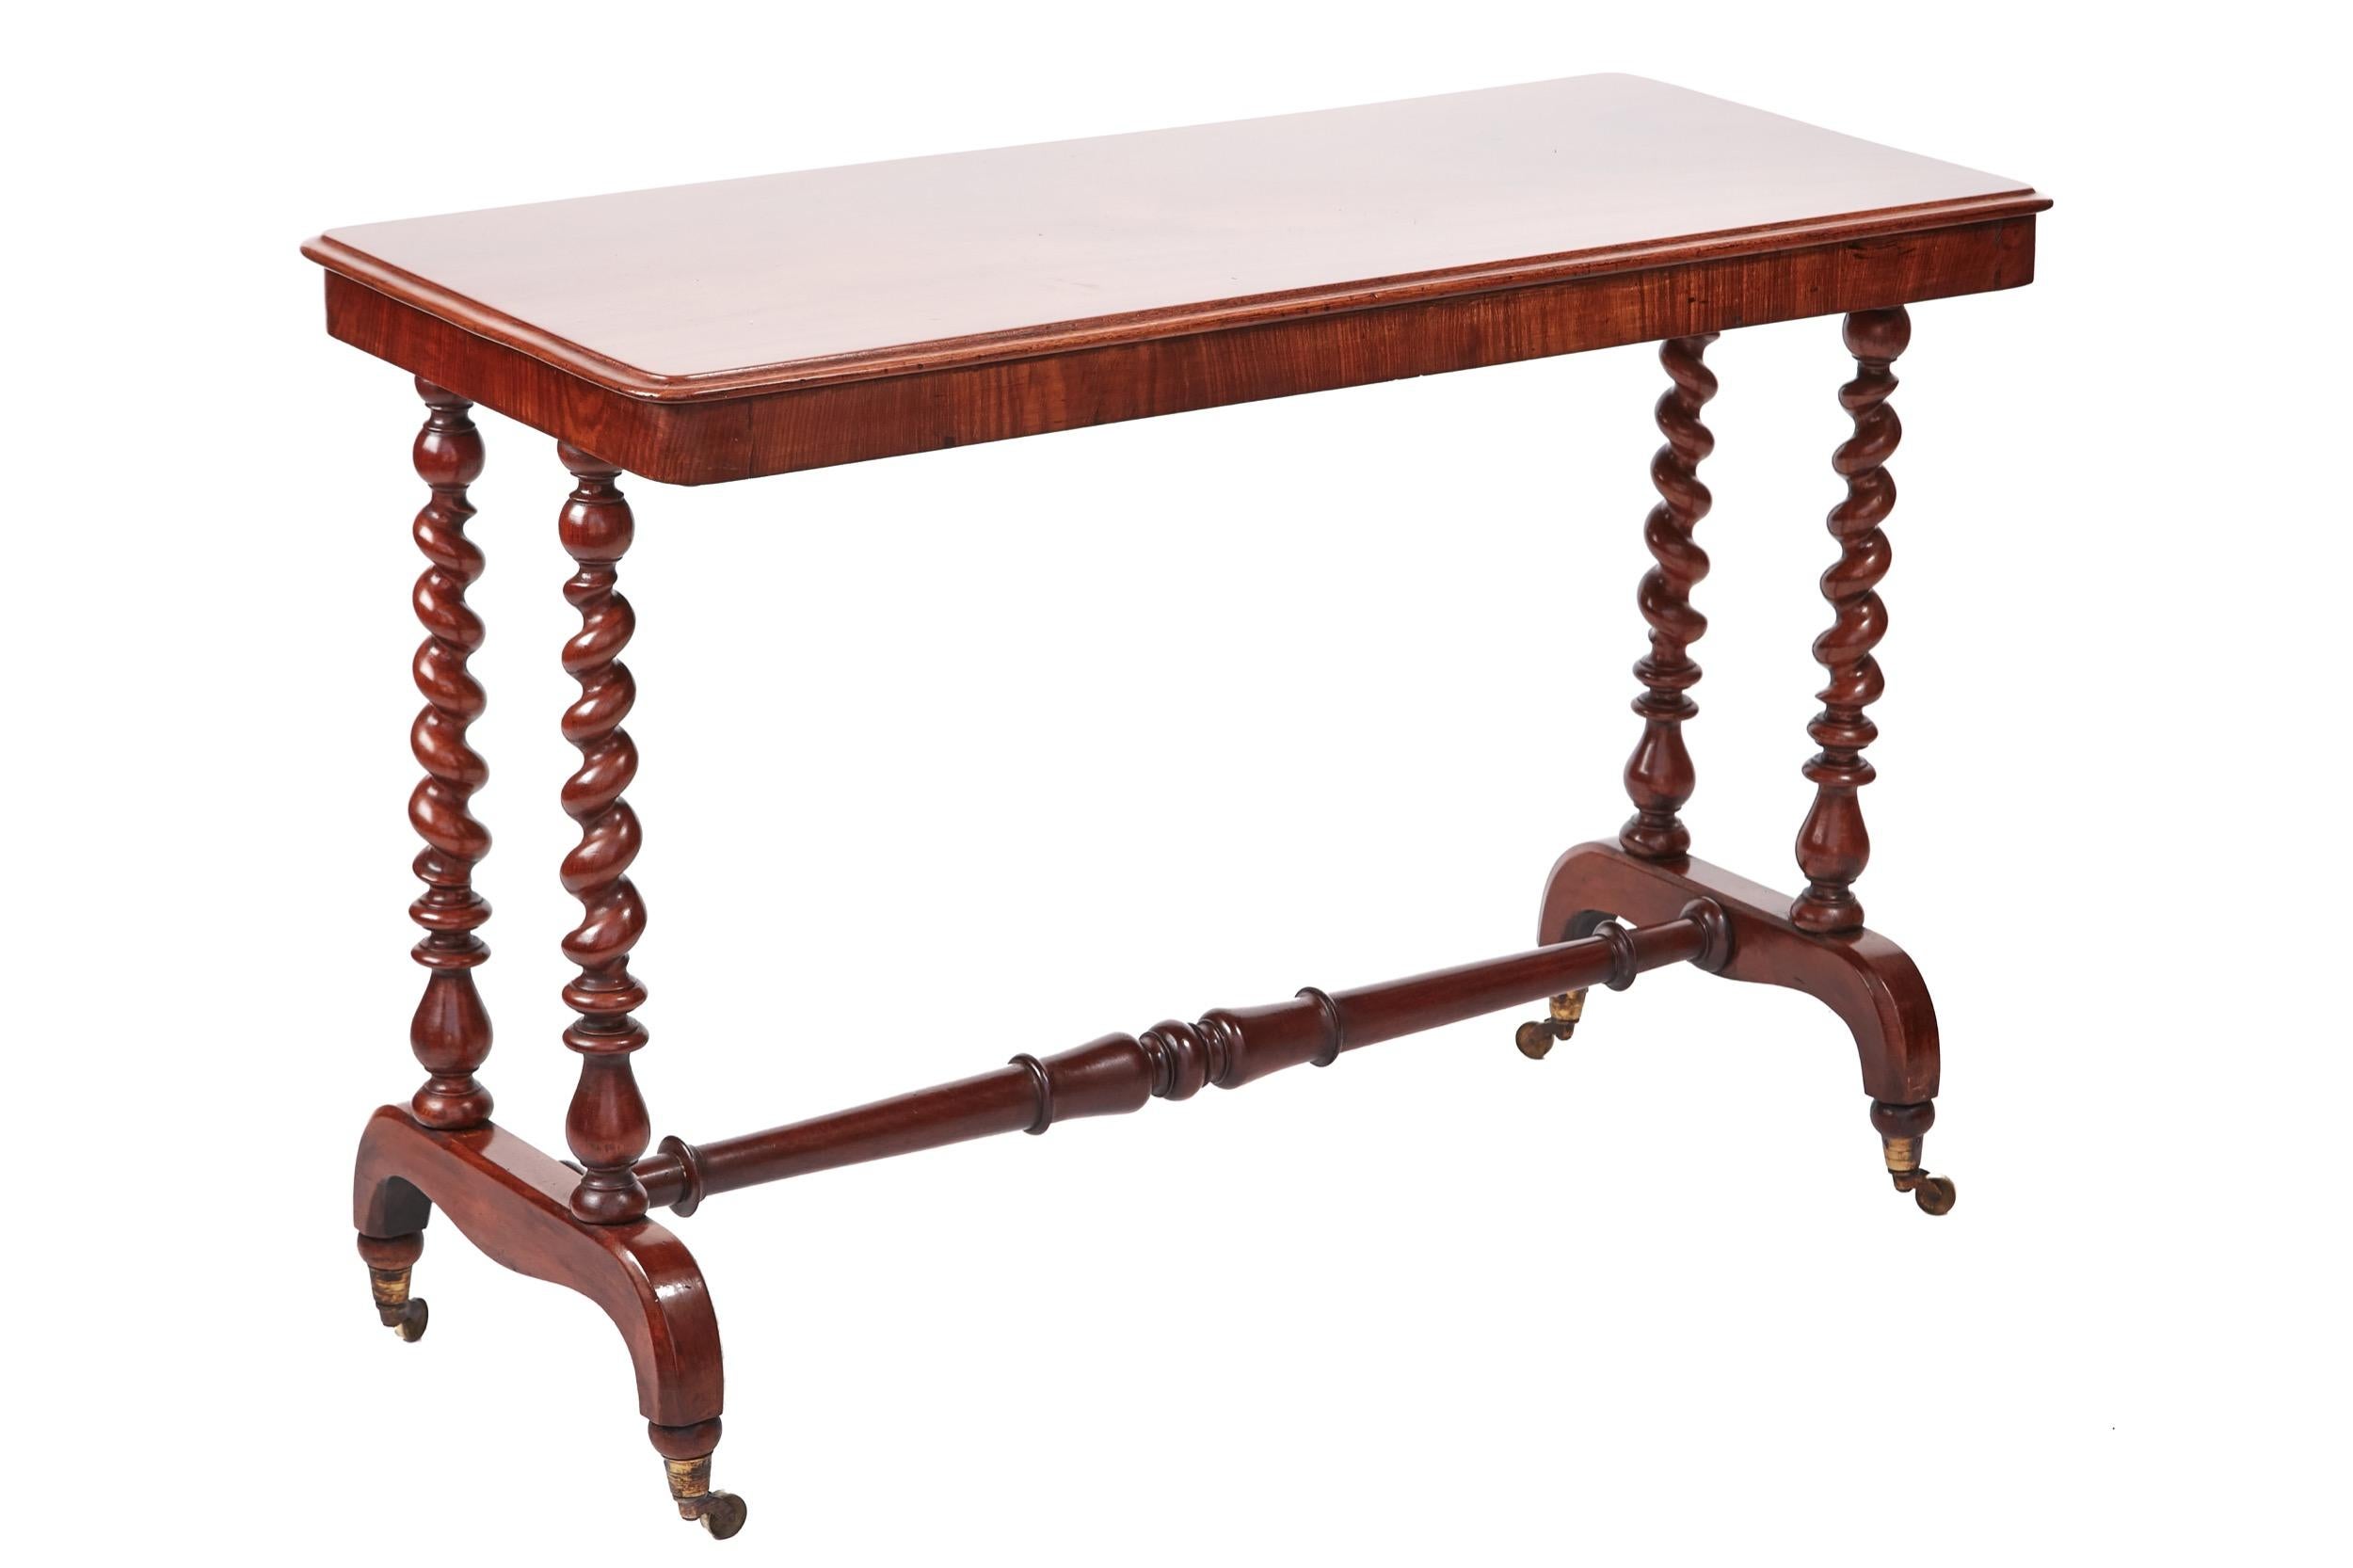 Quality victorian mahogany side table, having a lovely quality mahogany top with a thumb moulded edge,supported by four solid mahogany barley twist columns,standing on shaped ends with original brass castors, united by a solid mahogany turned